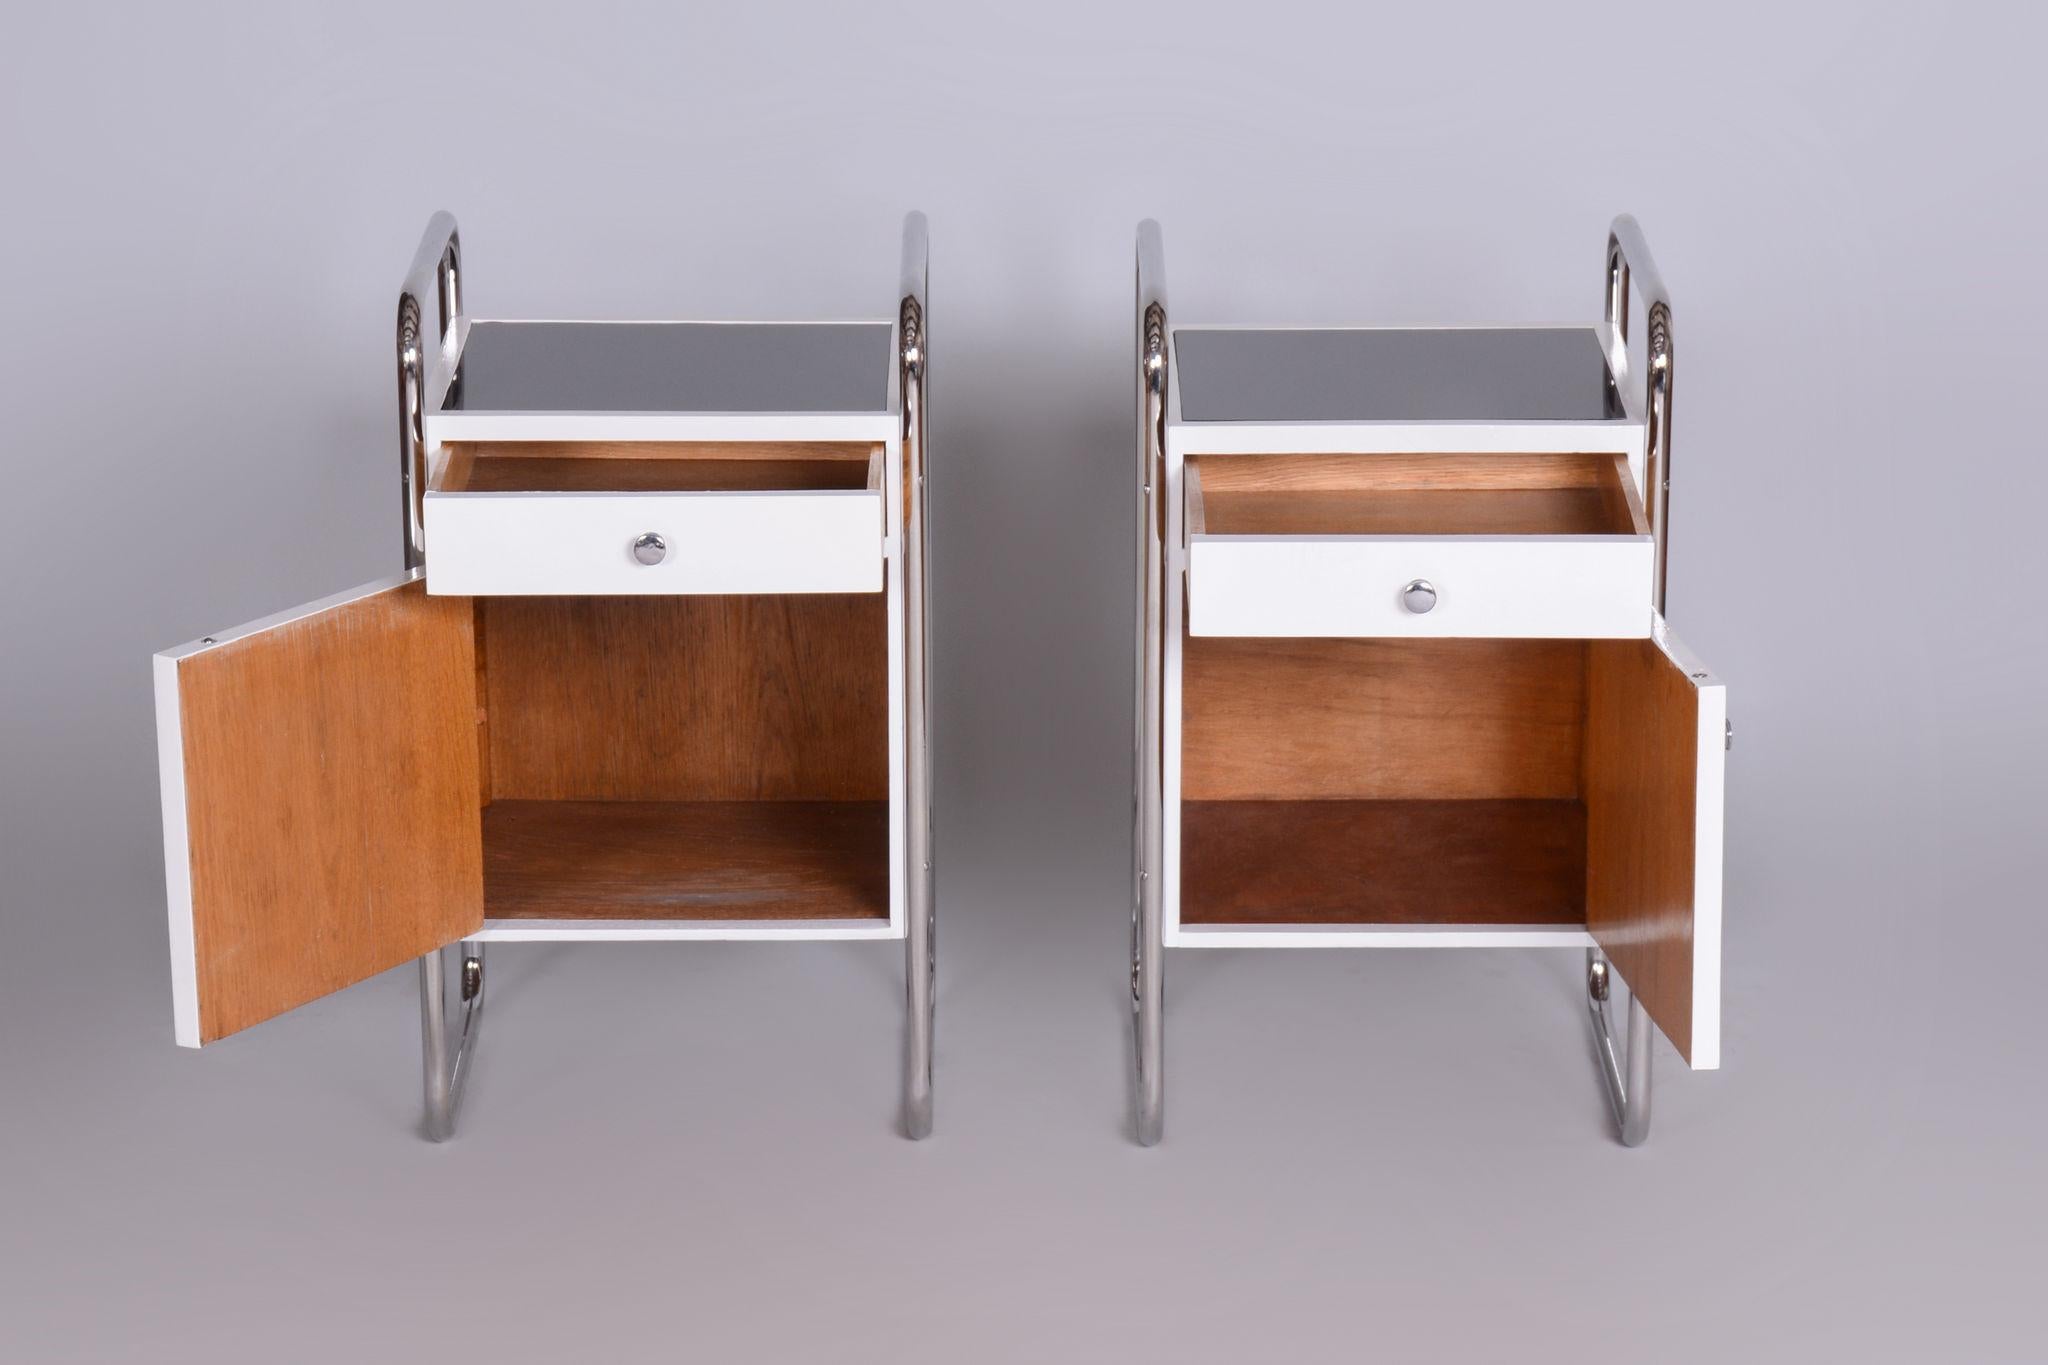 Restored Bauhaus Pair of Bedside Tables, Vichr a spol, Chrome, Czechia, 1930s For Sale 1